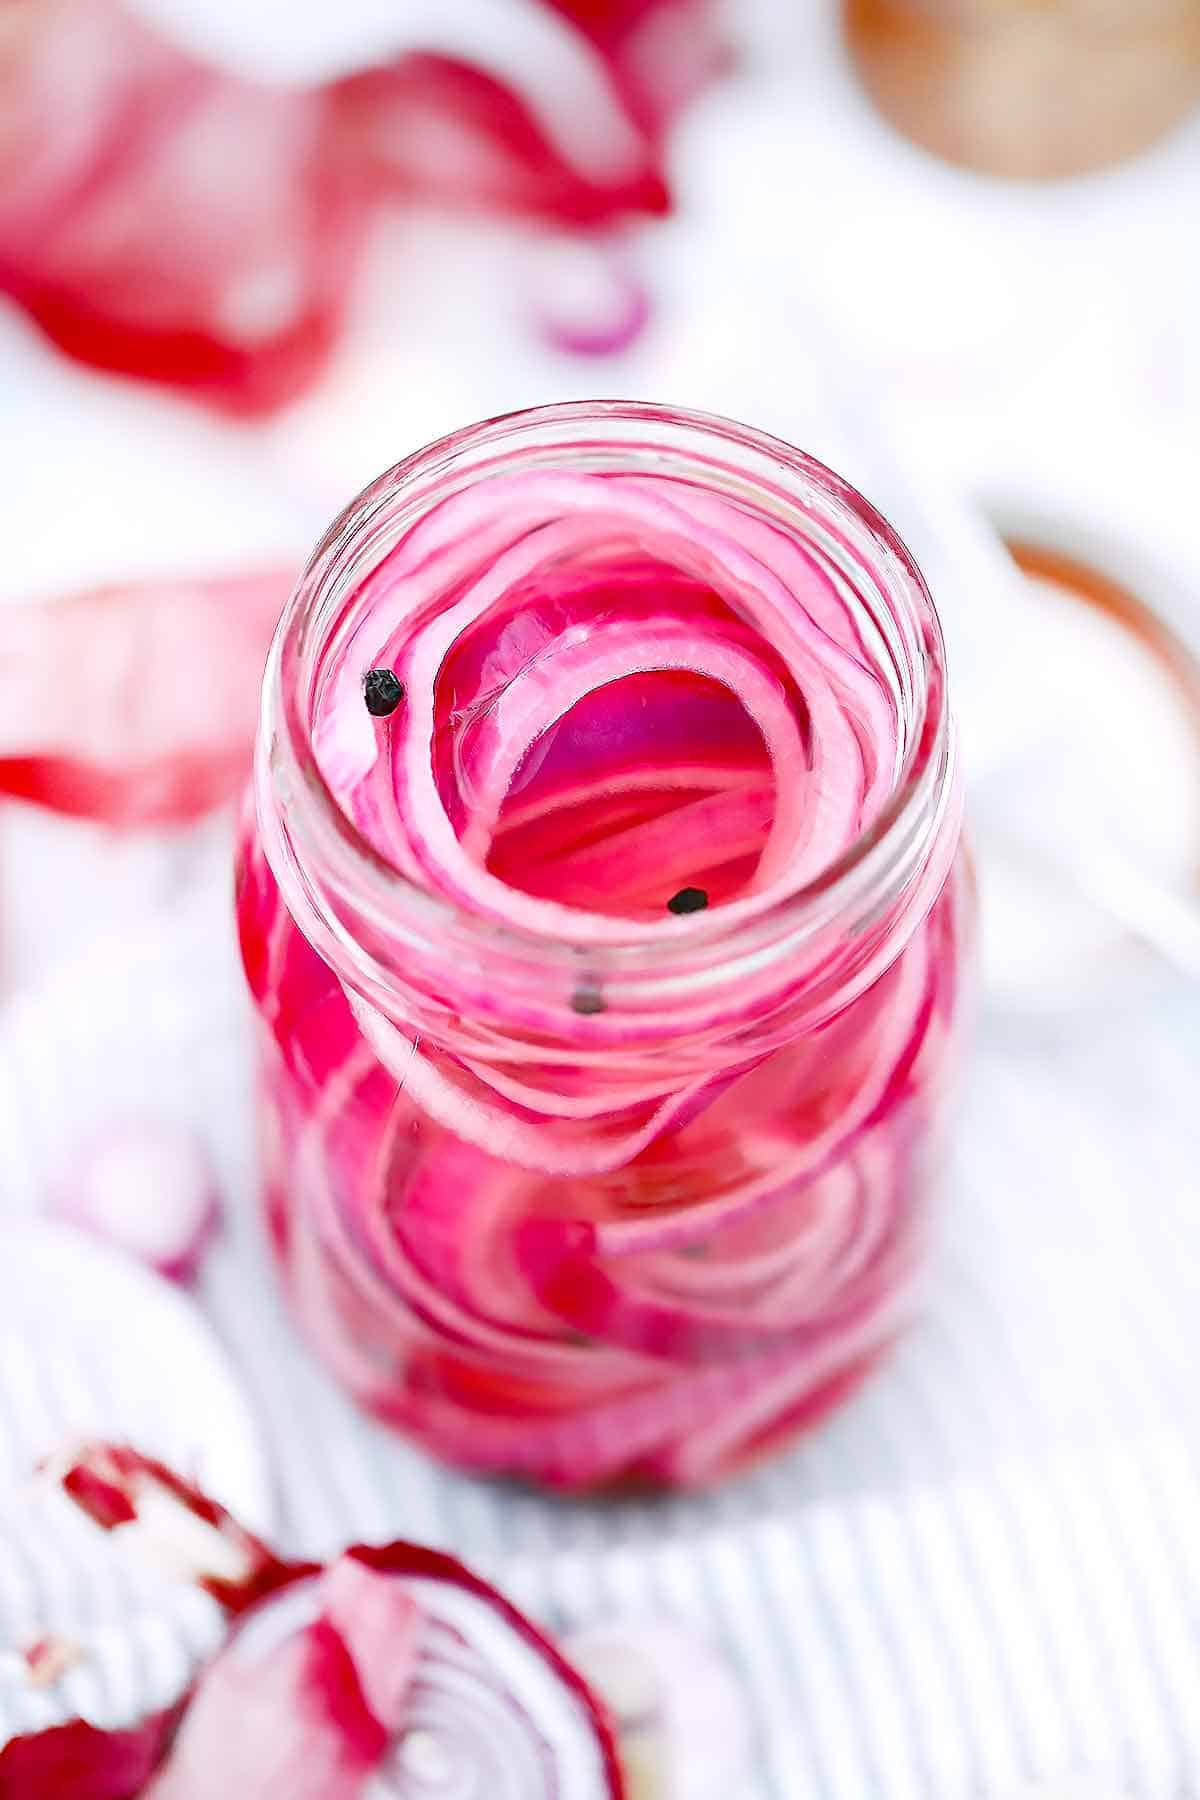 Quick pickled red onions in a mason jar.